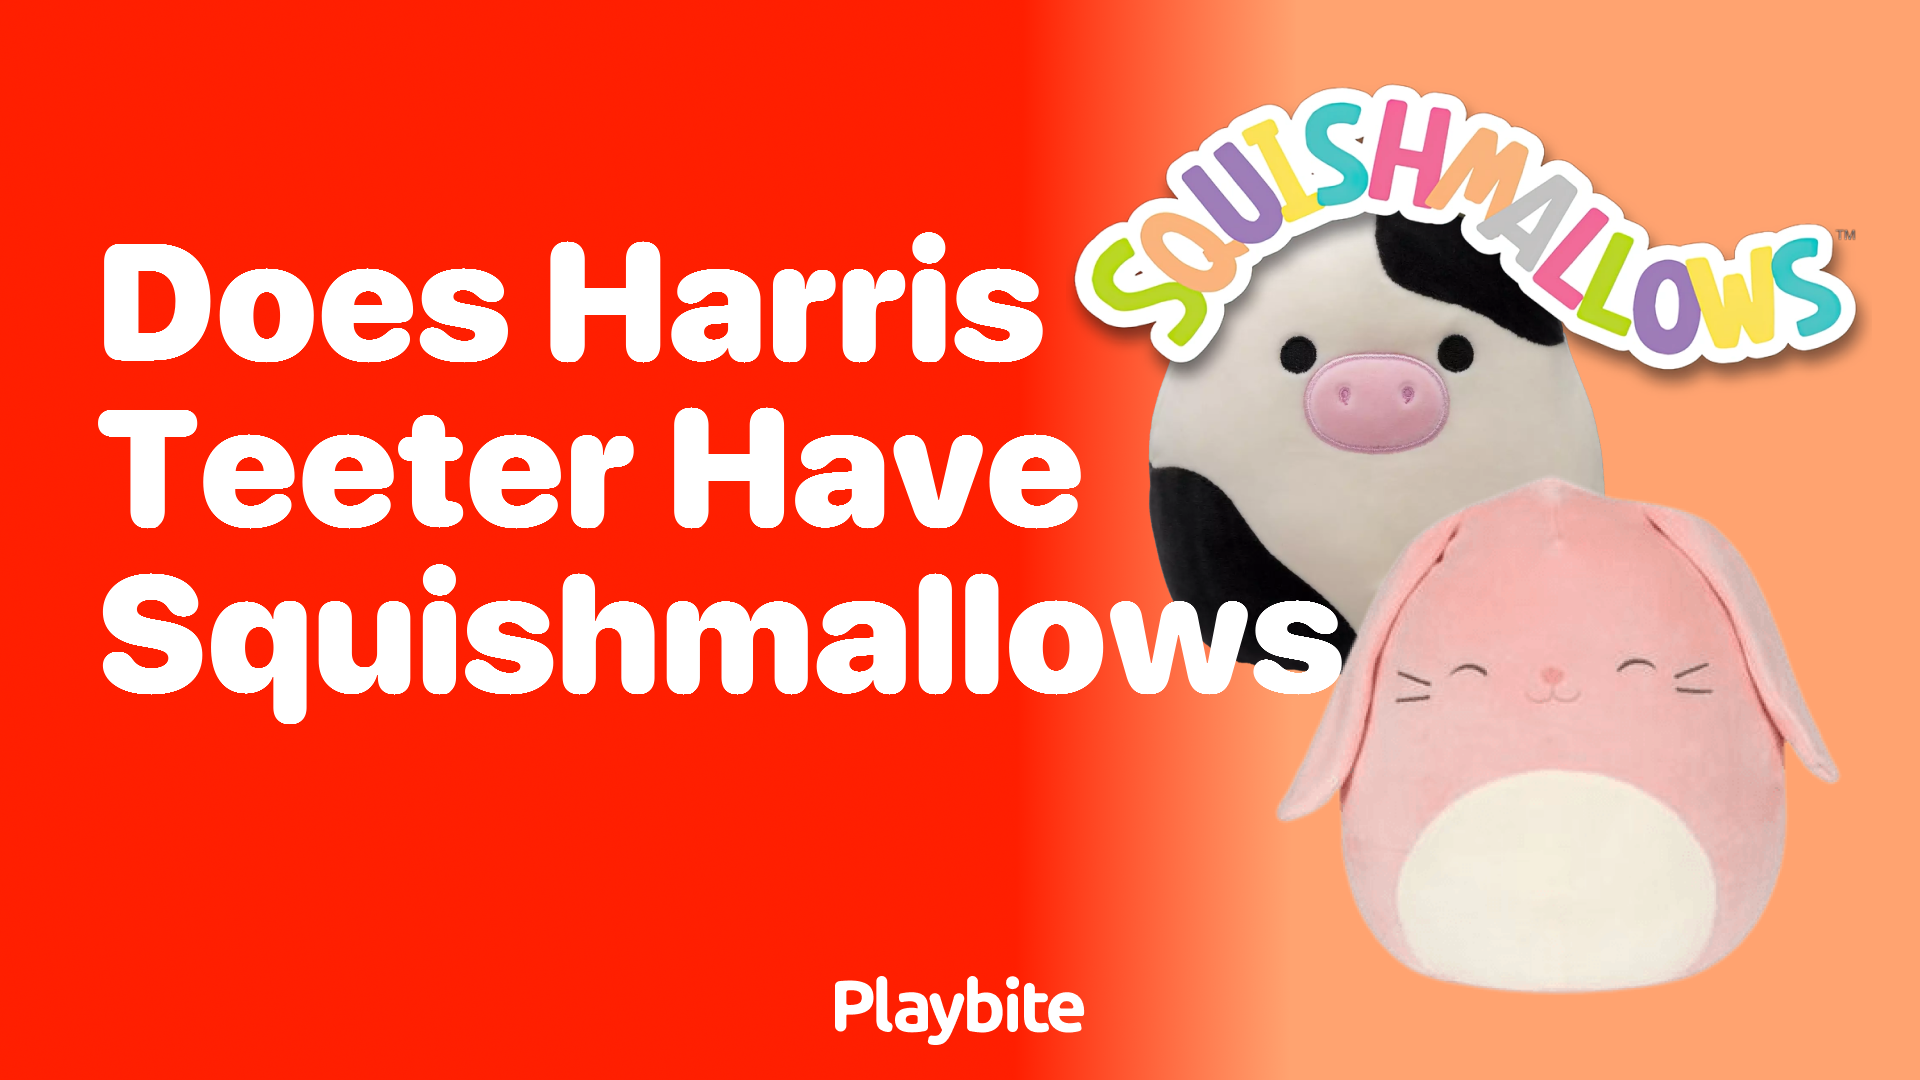 Does Harris Teeter Have Squishmallows? Uncovering the Truth